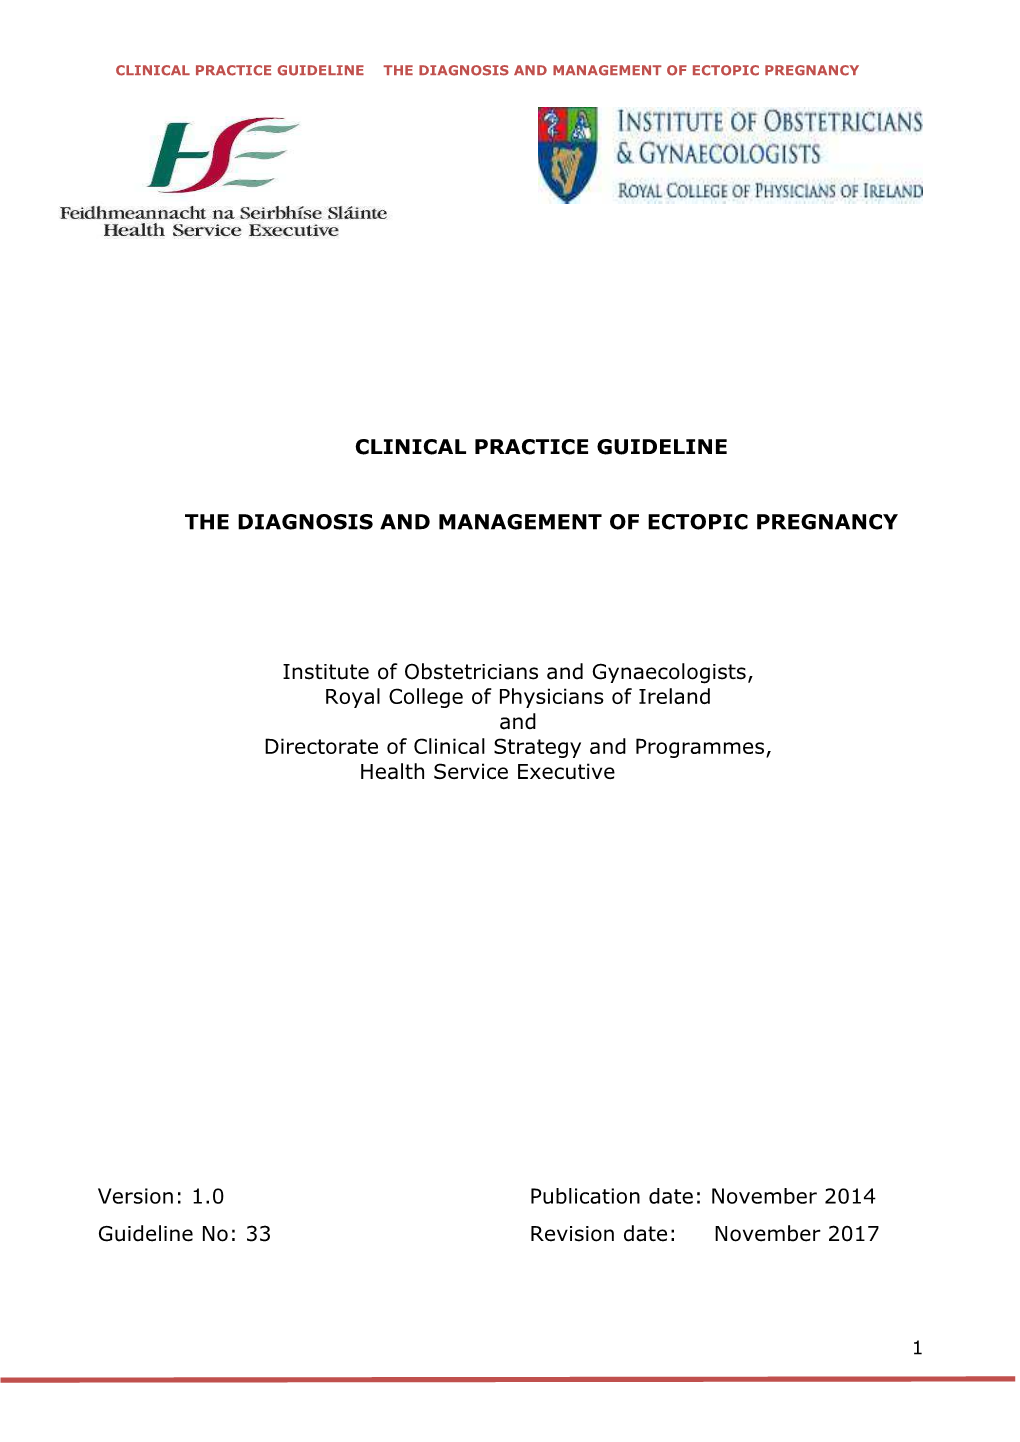 Diagnosis and Management of Ectopic Pregnancy